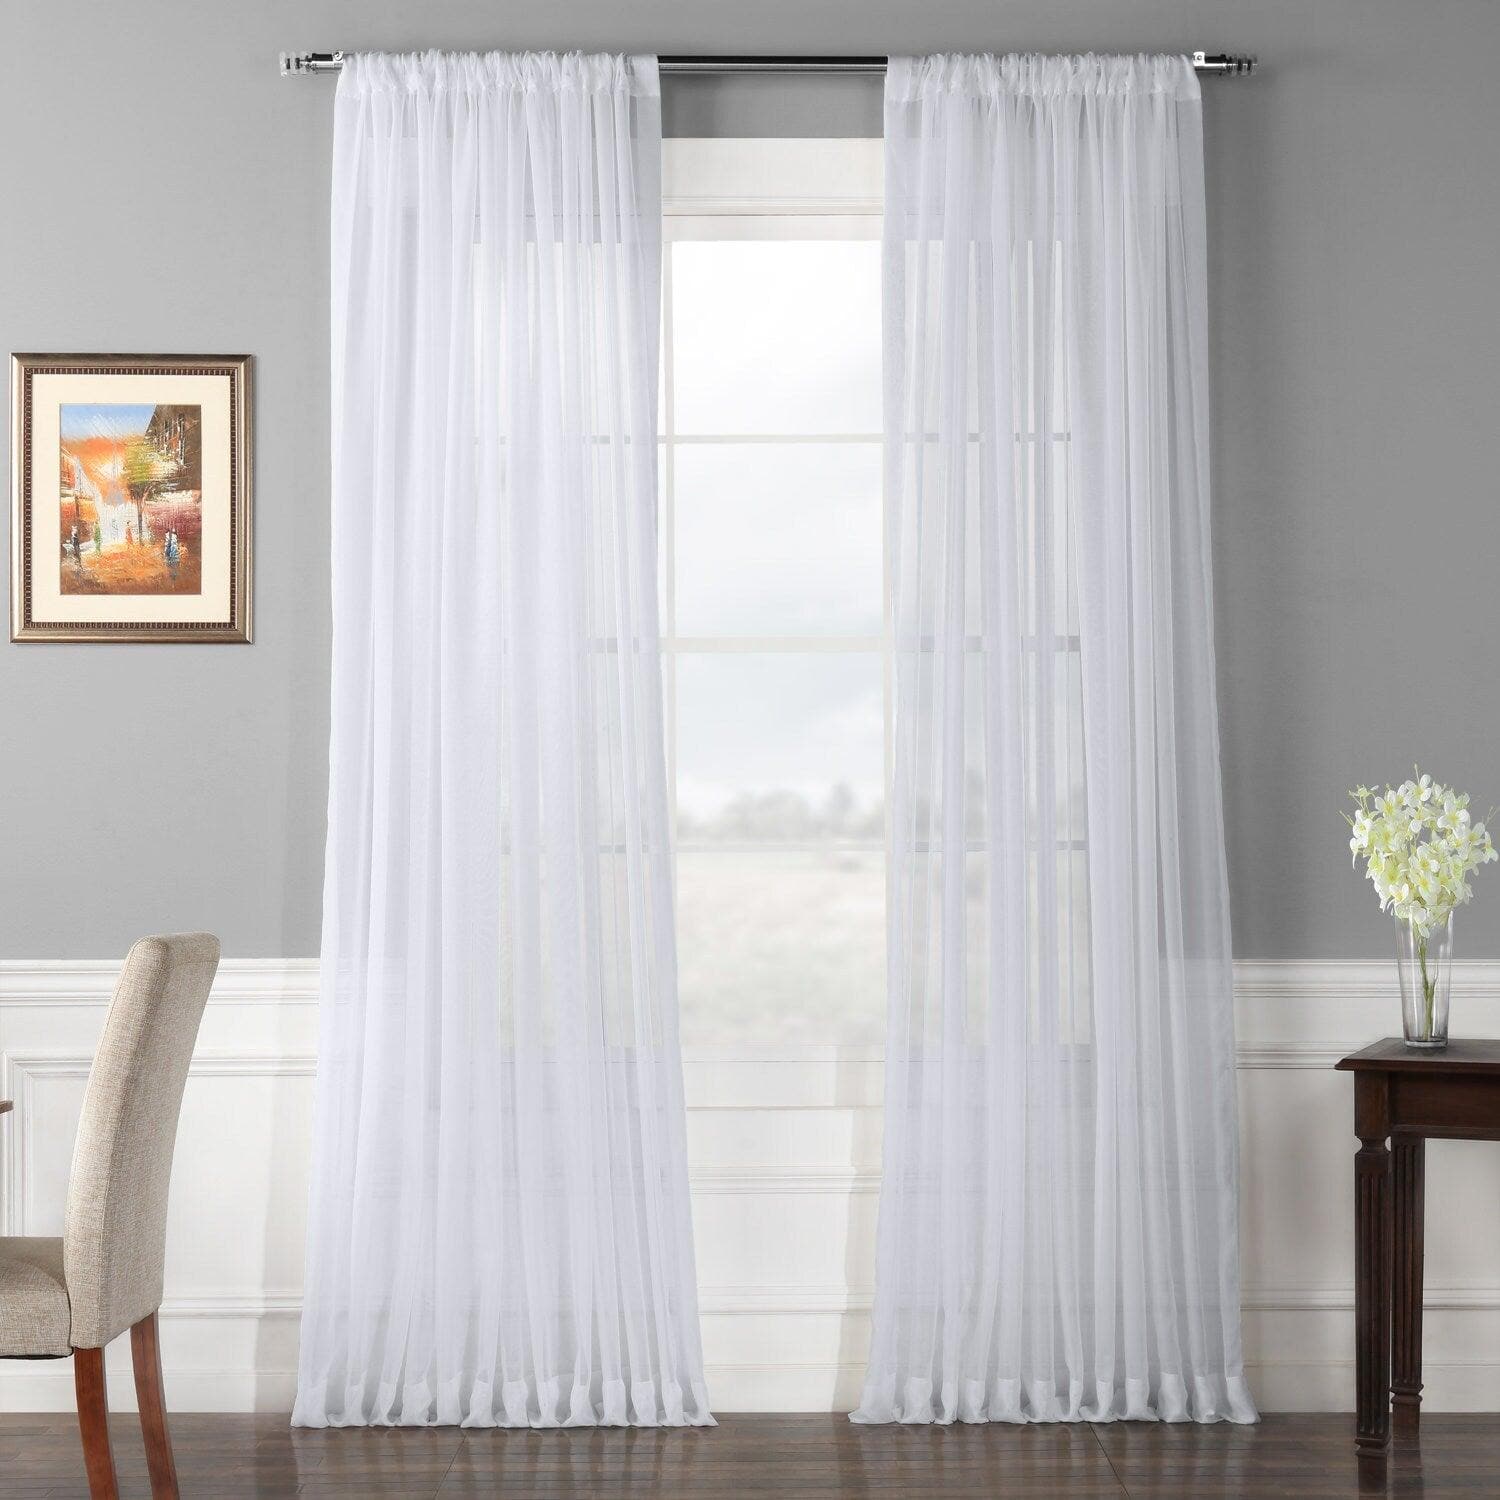 Solid White Extra Wide Voile Sheer Curtain